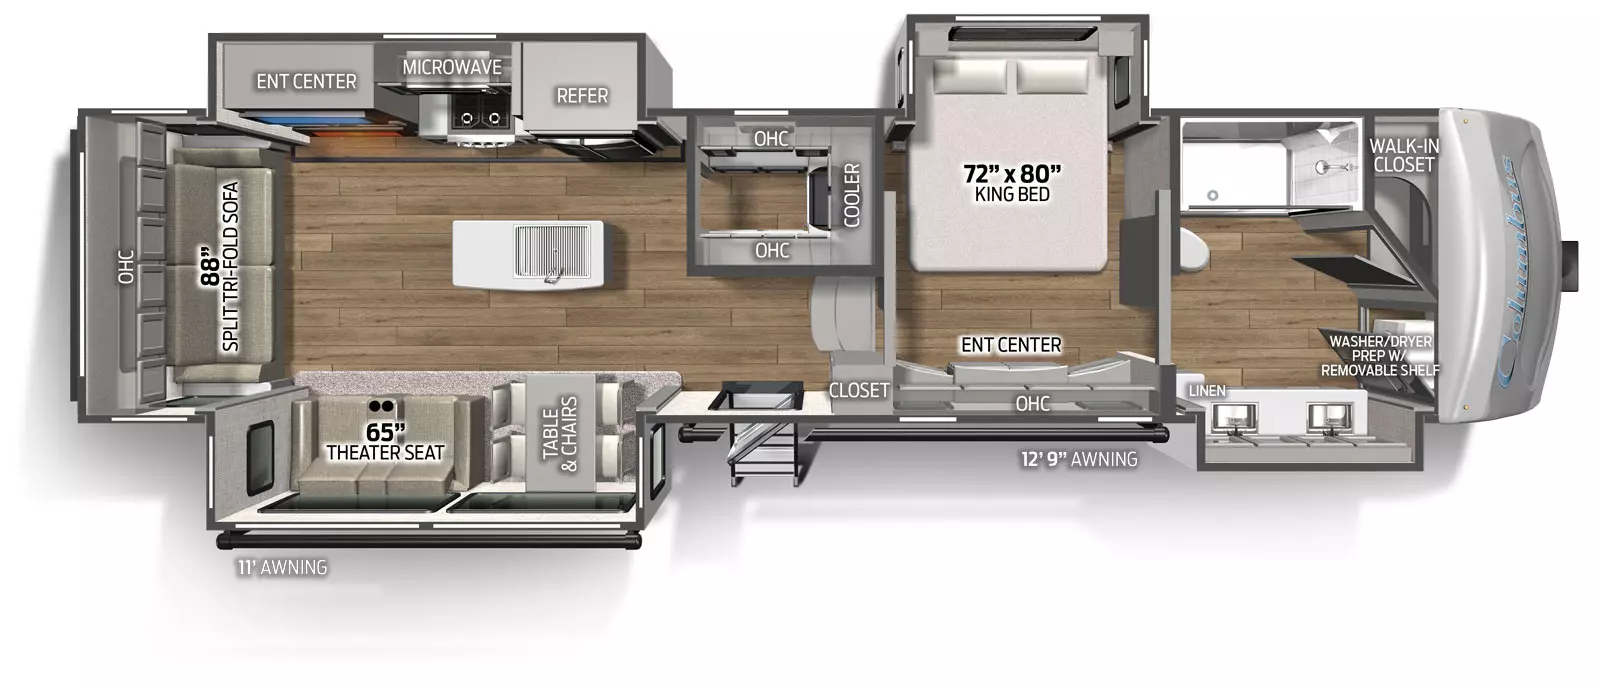 The 382FB has 4 slide outs, 2 on the road side and two on the camp side, along with one entry door on the camp side. Interior layout from front to back: front bathroom with walk in closet and two sinks and cabinets in the camp side slide out, bedroom with king size bed in the road side slide out, walk in pantry with mini fridge, kitchen dining, living area with the road side slide out containing residential refrigerator, cooktop with oven and overhead microwave, TV entertainment area; The camp side slide out containing freestanding table and chairs and theater seating.